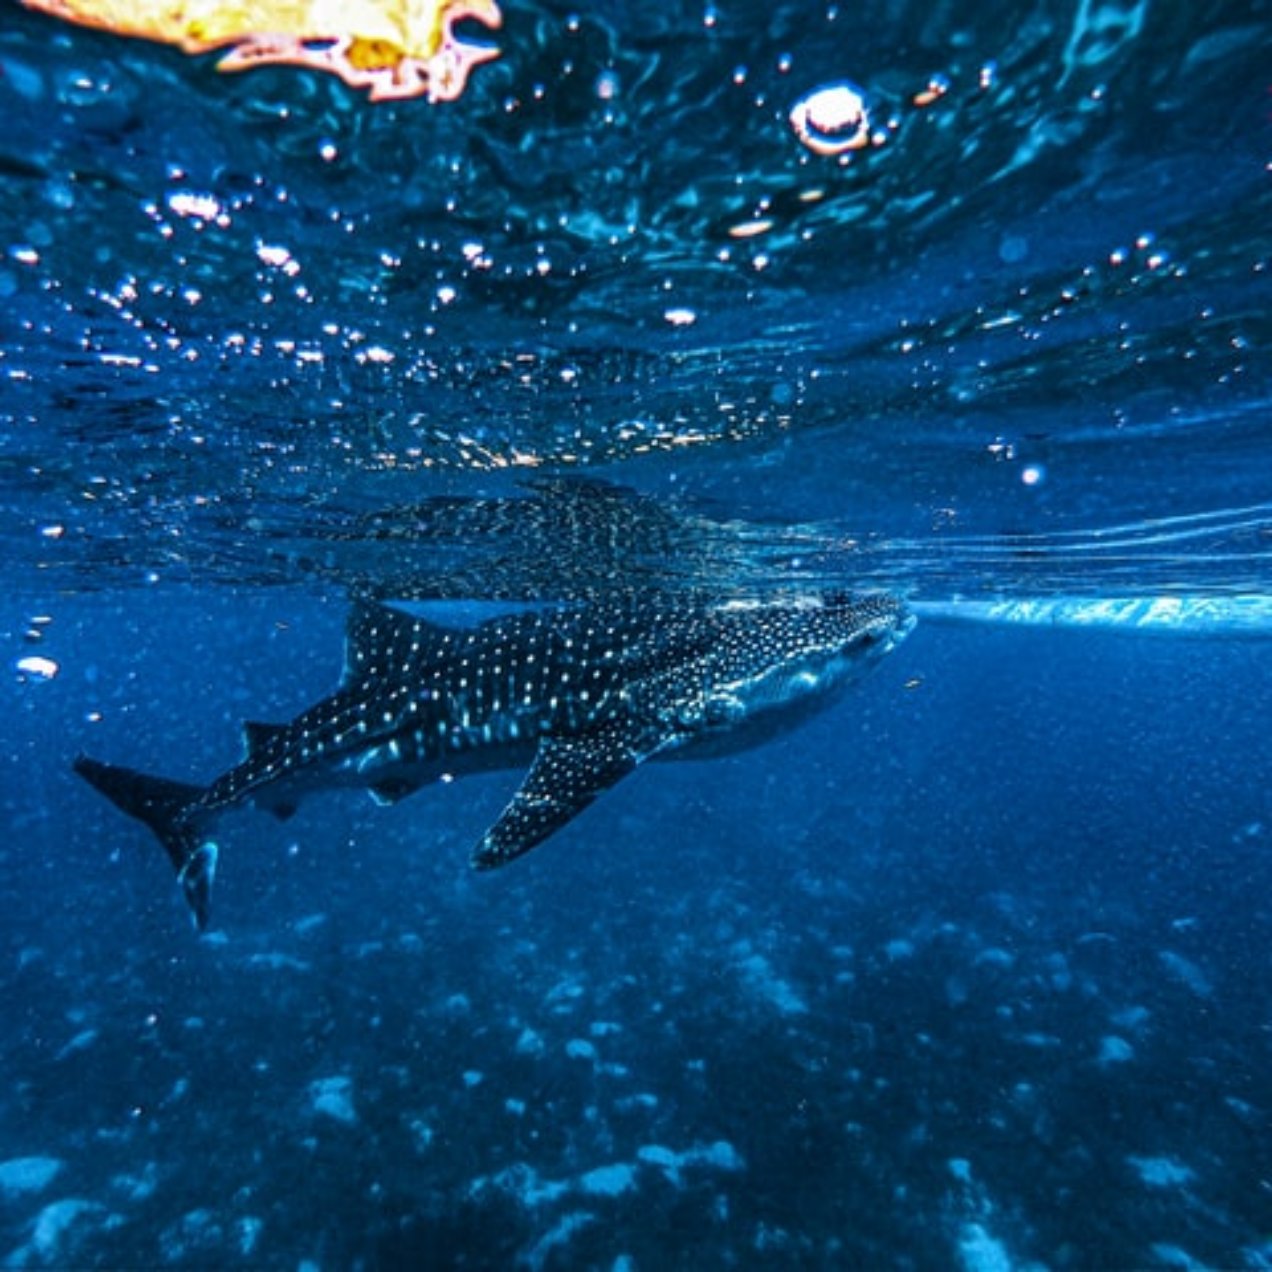 Swim With Whale Sharks in Cancun